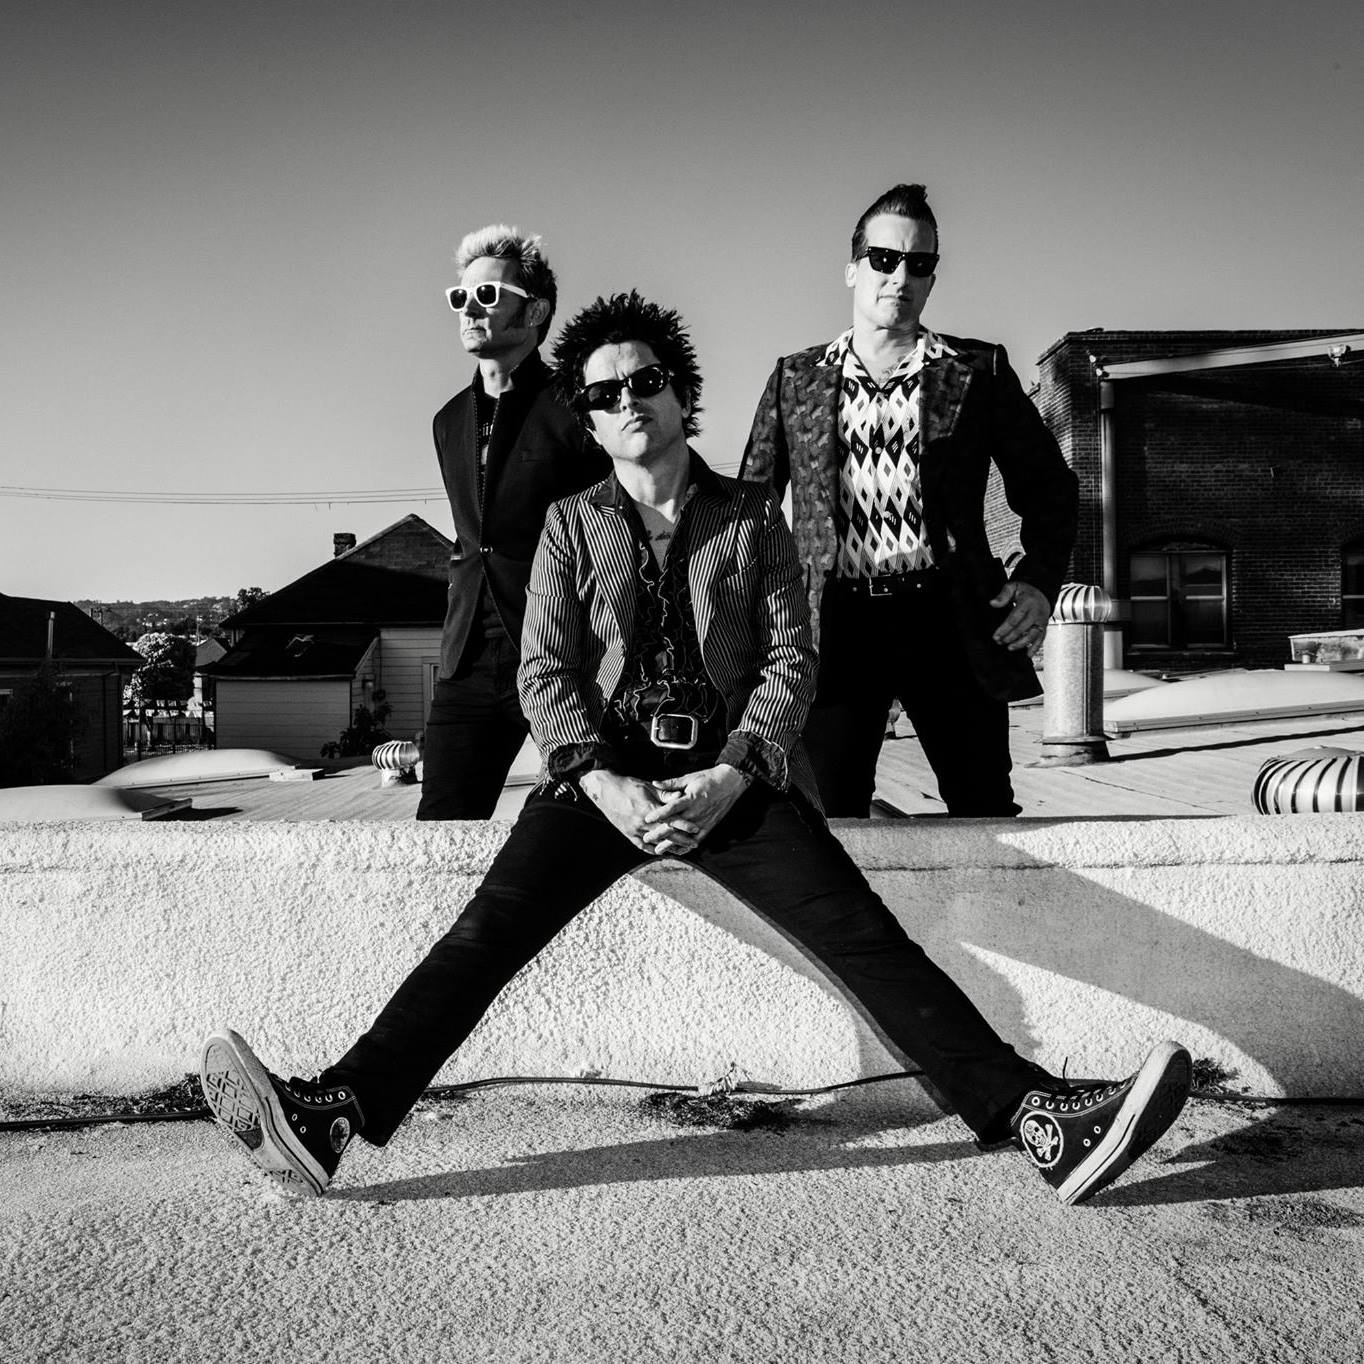 Photo via Green Day's Facebook page